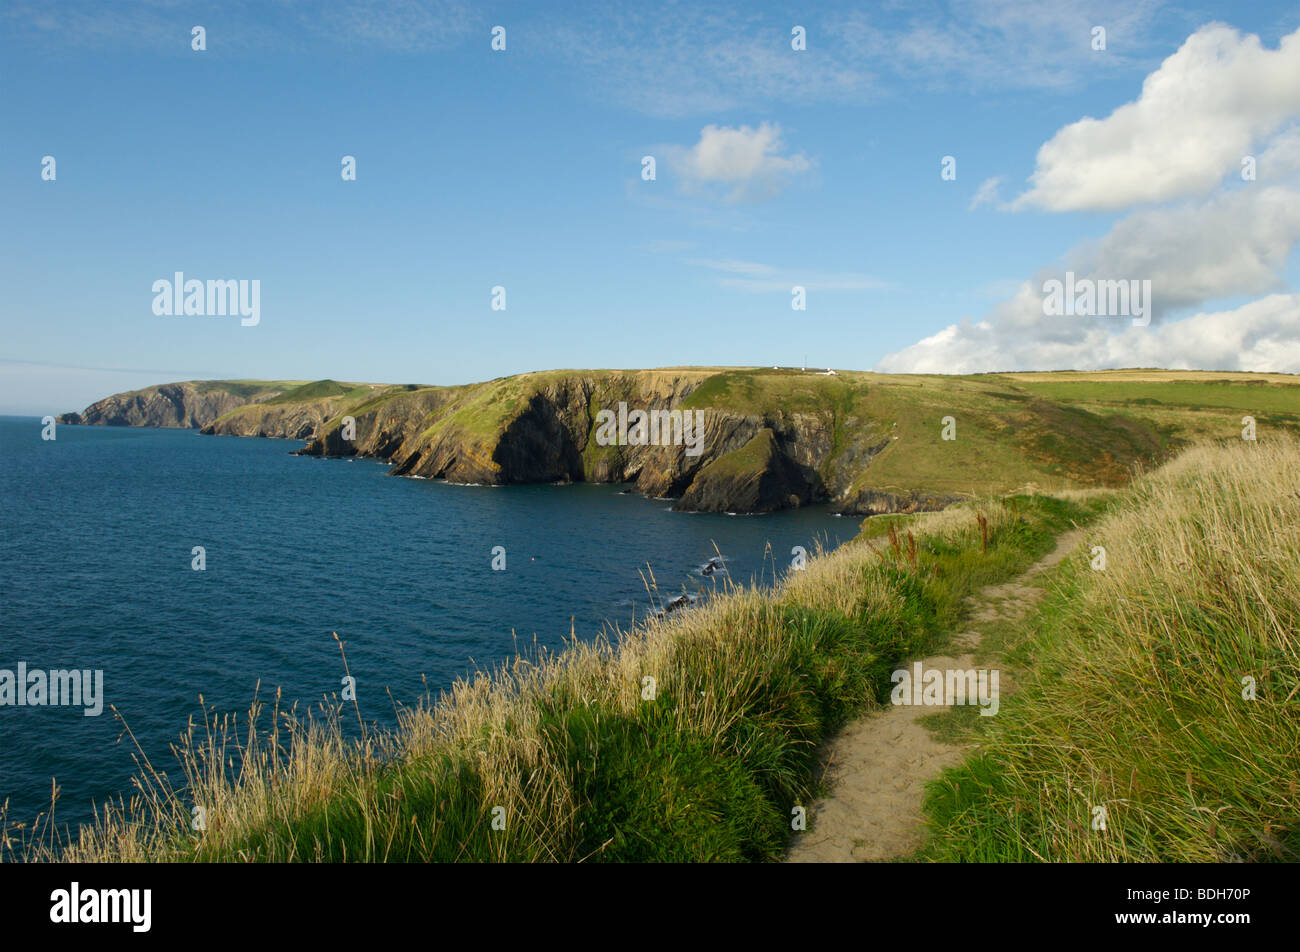 The cliffs by Ceibwr Bay, Pembrokeshire, Wales Stock Photo